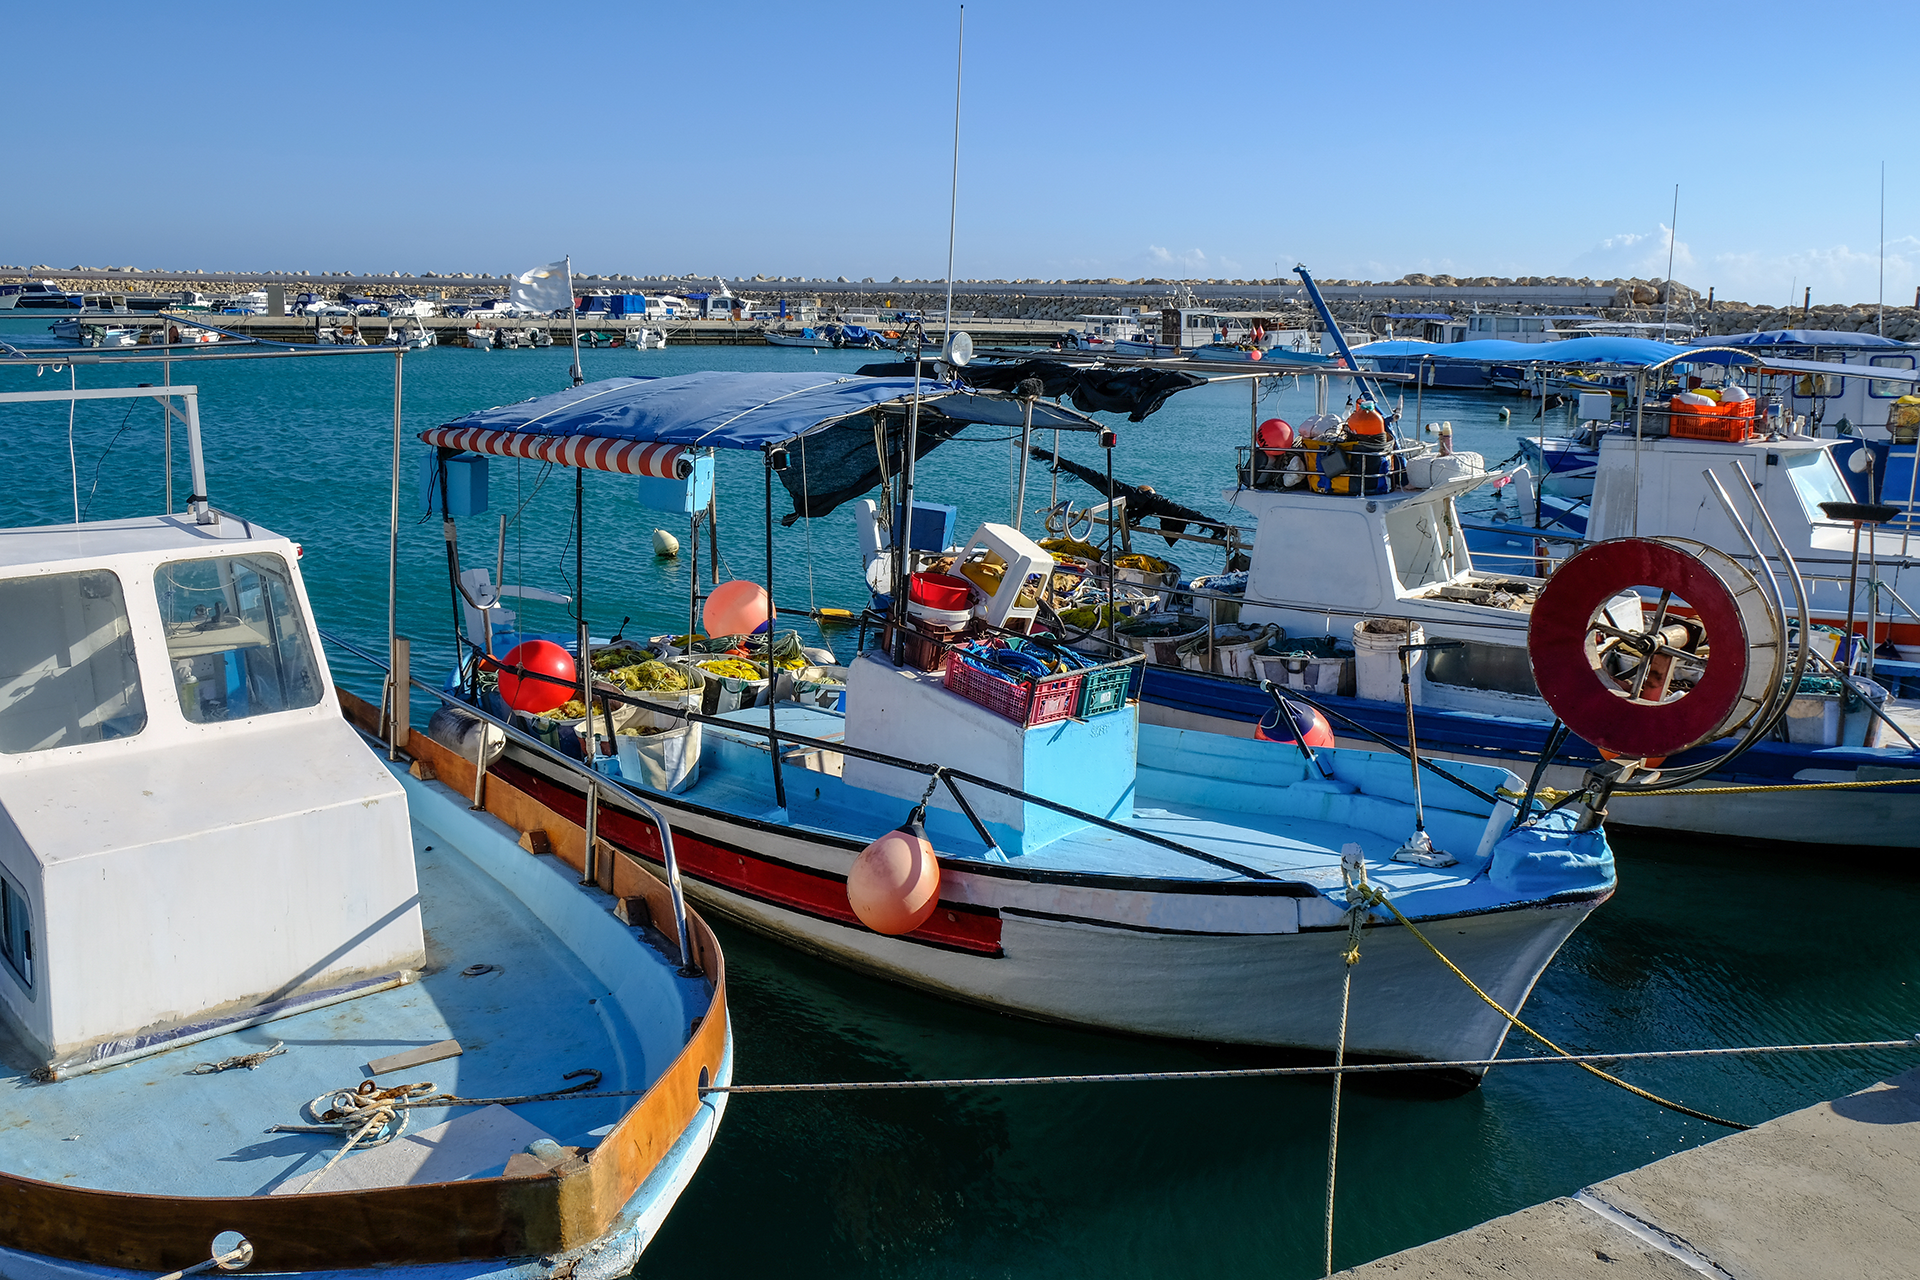 Zygi is a scenic delight with its fishing boats bobbing in the clear blue waters, adding to its rustic beauty